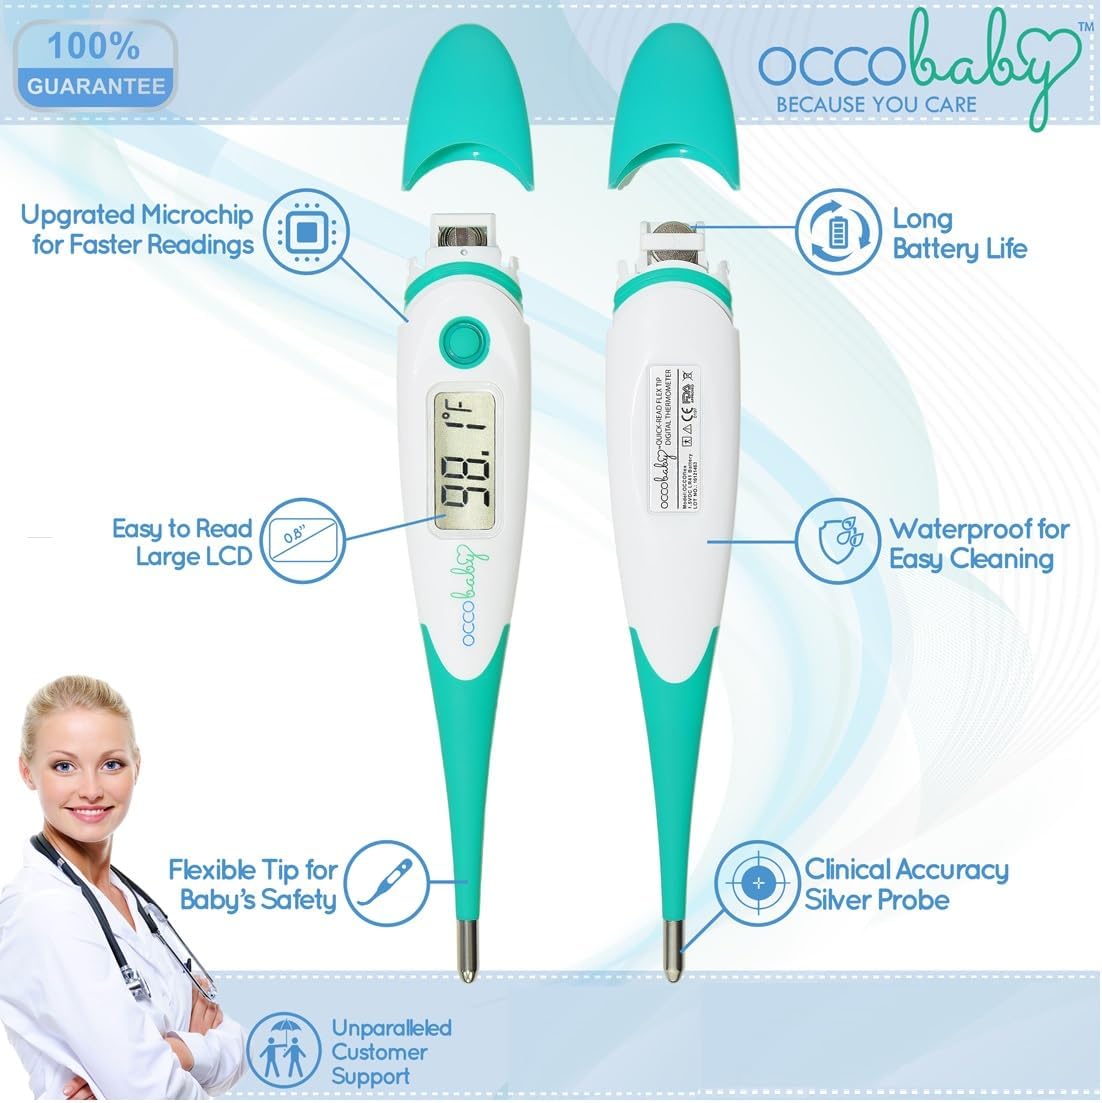 OCCObaby Clinical Digital Baby Thermometer - LCD, Flexible Tip, 10 Second Quick Accurate Fever Alarm Rectal Oral & Underarm Use - Waterproof Baby Thermometer for Infants & Toddlers : Baby